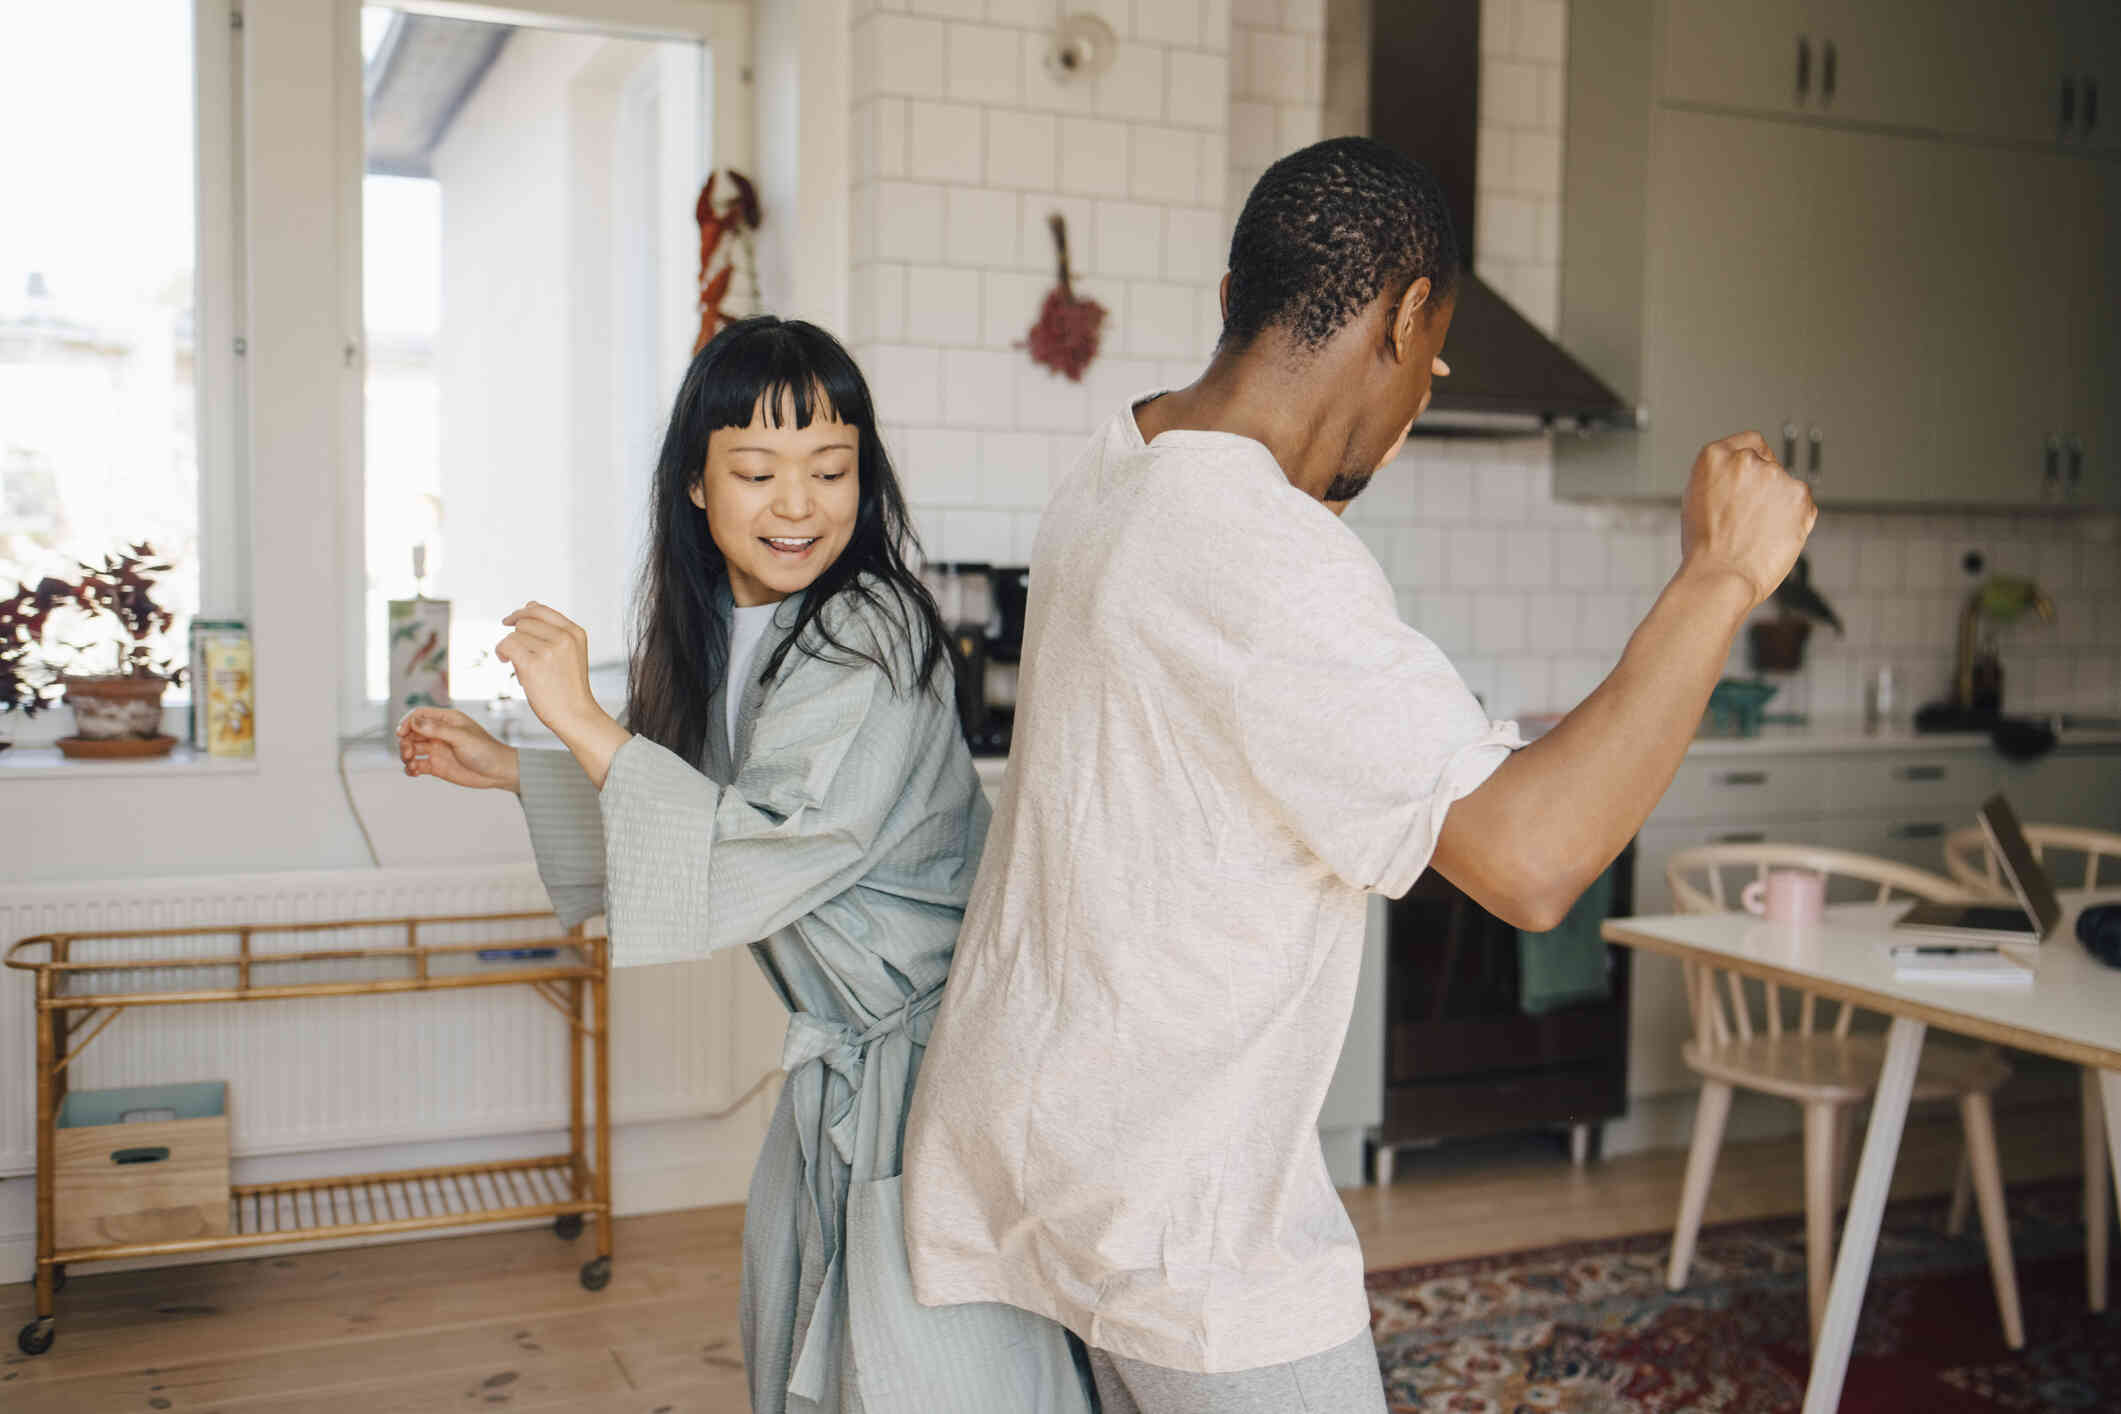 A male and female couple wearing pajamas dance together in their livingroom while smiling.